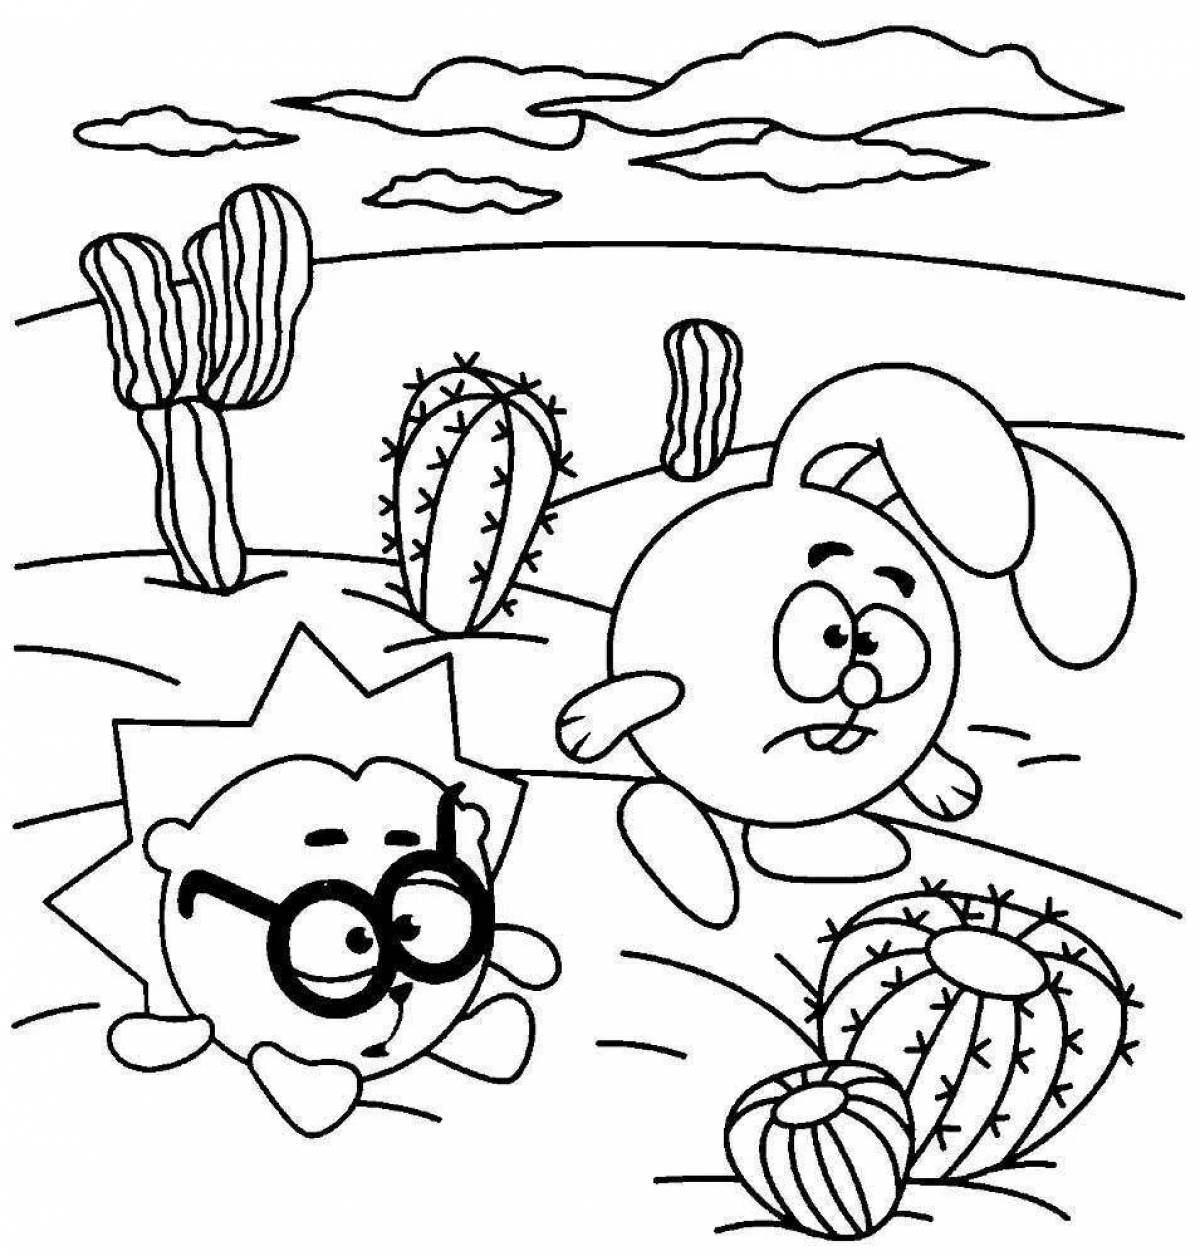 Innovative coloring pages